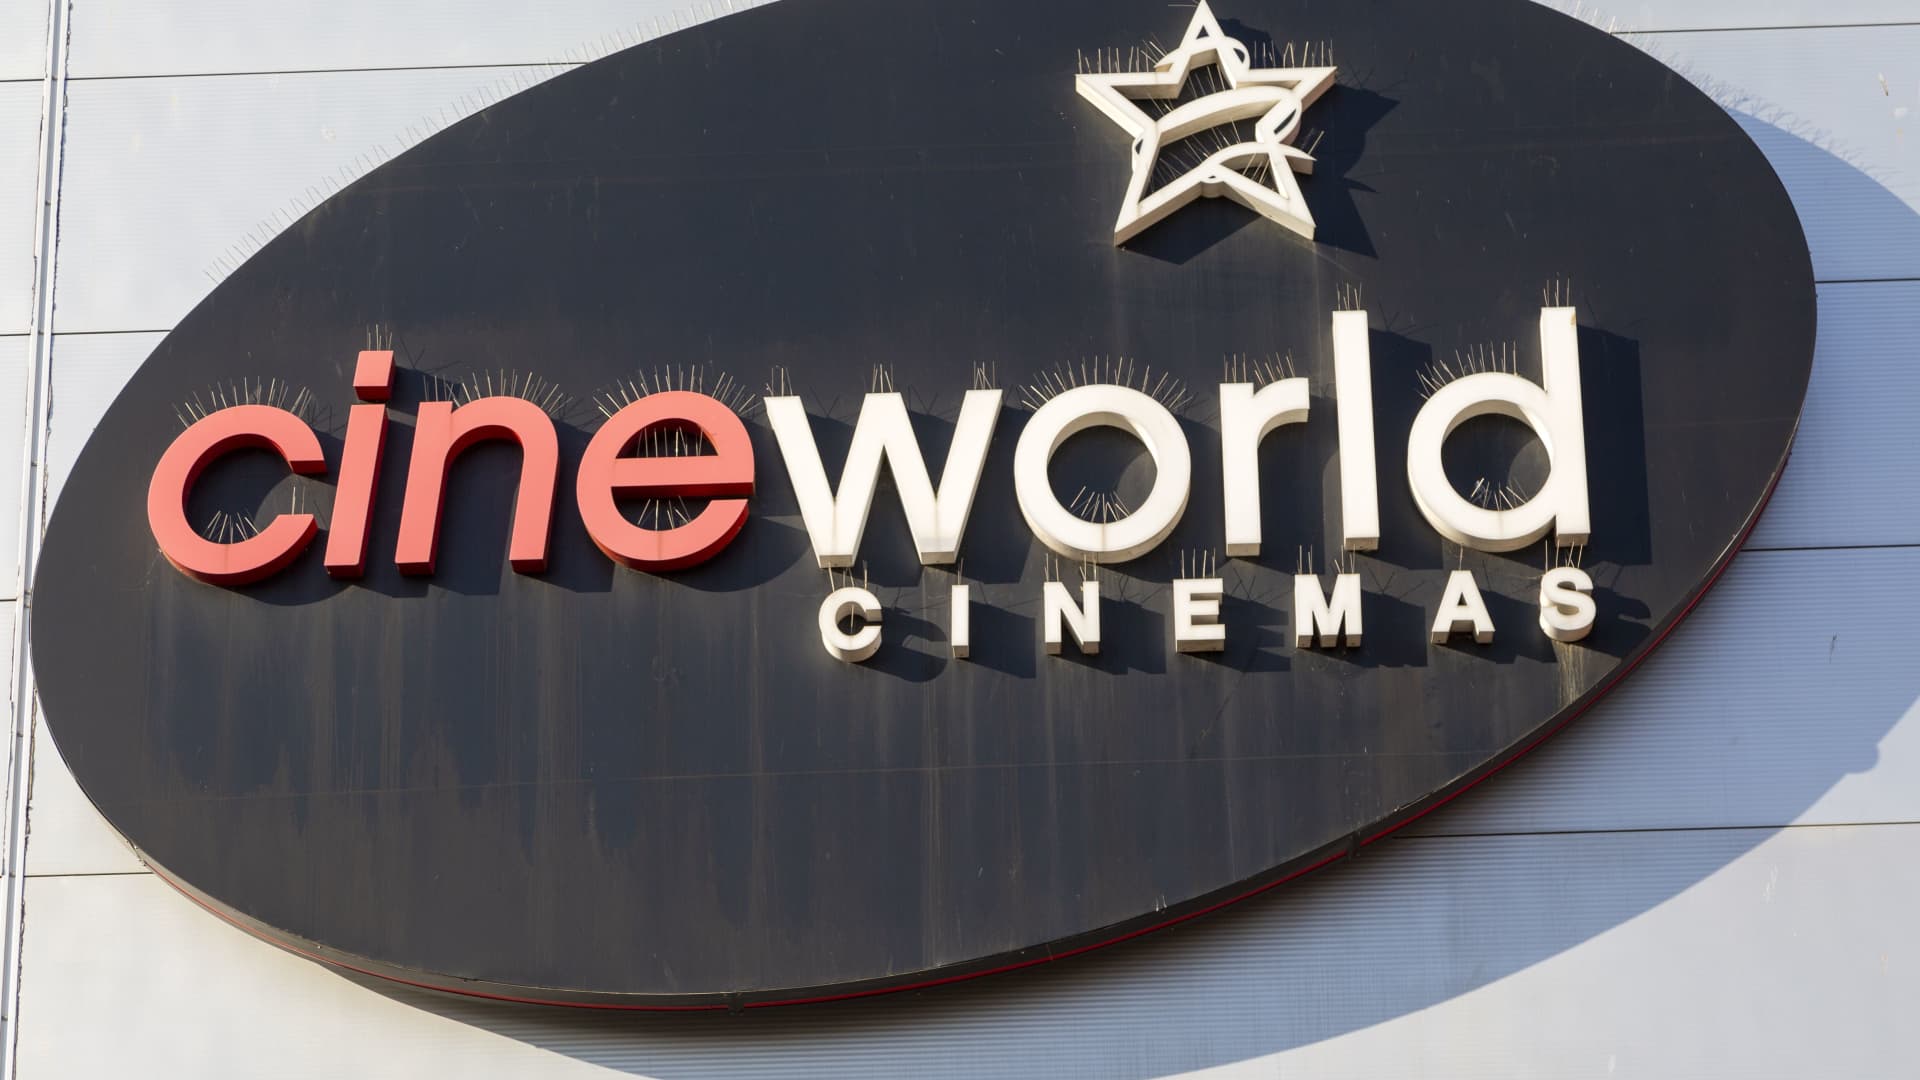 Cineworld, which operates 9,000 theatres in 10 countries, has warned that a lack of blockbusters is hurting admissions.